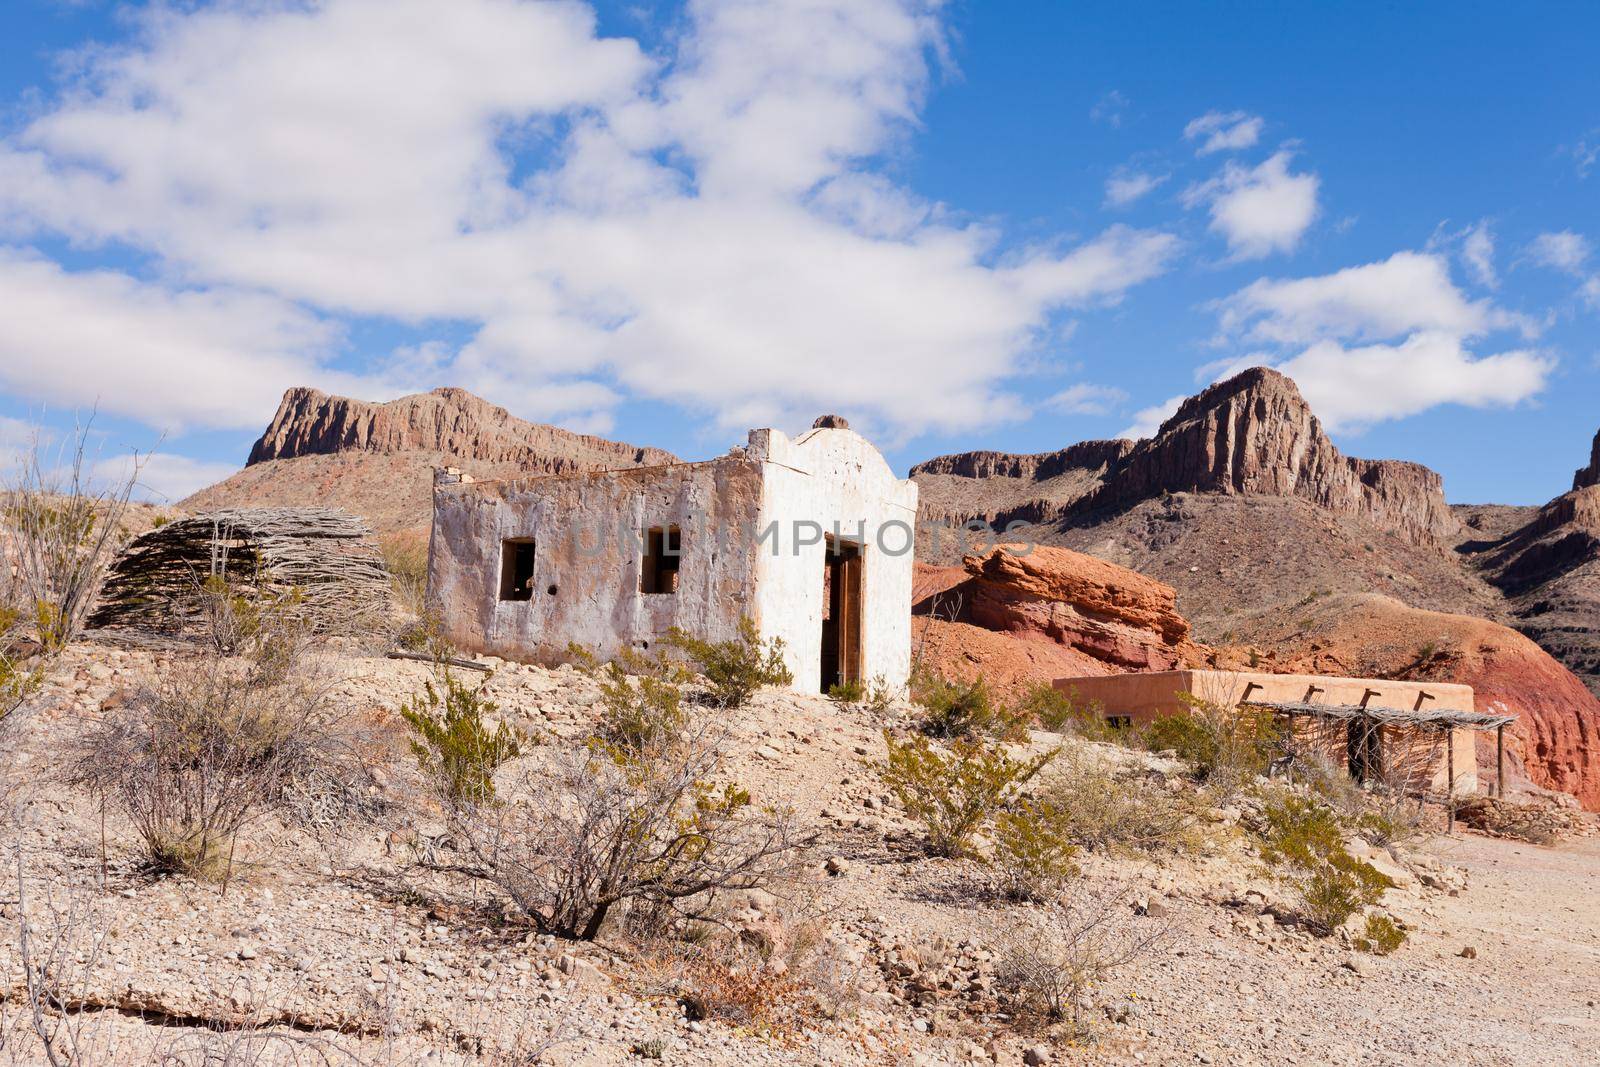 Deserted rancheria adobe buildings in colorful hot rocky desert of south western Texas, USA